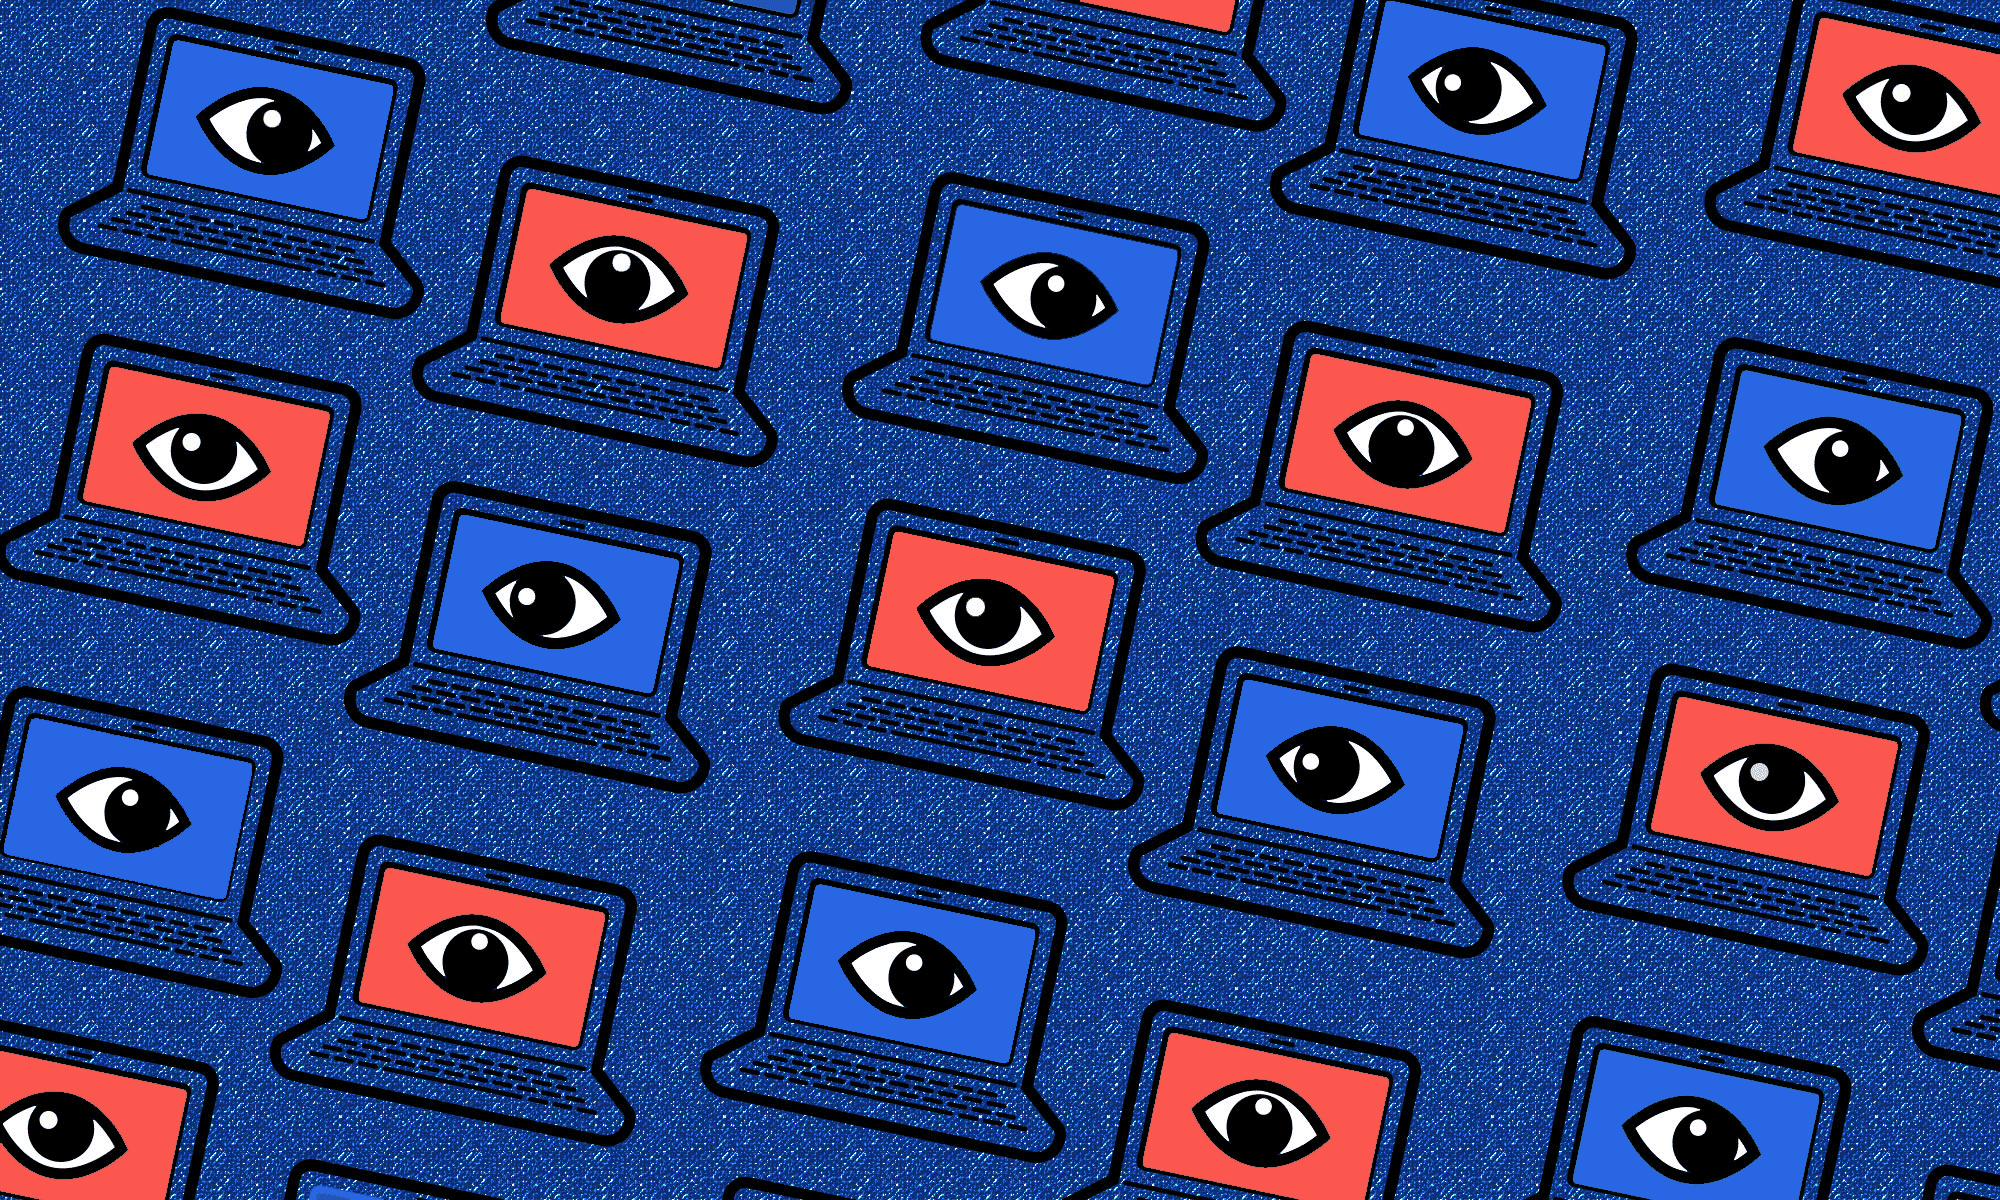 Why online privacy matters — and how to protect yours